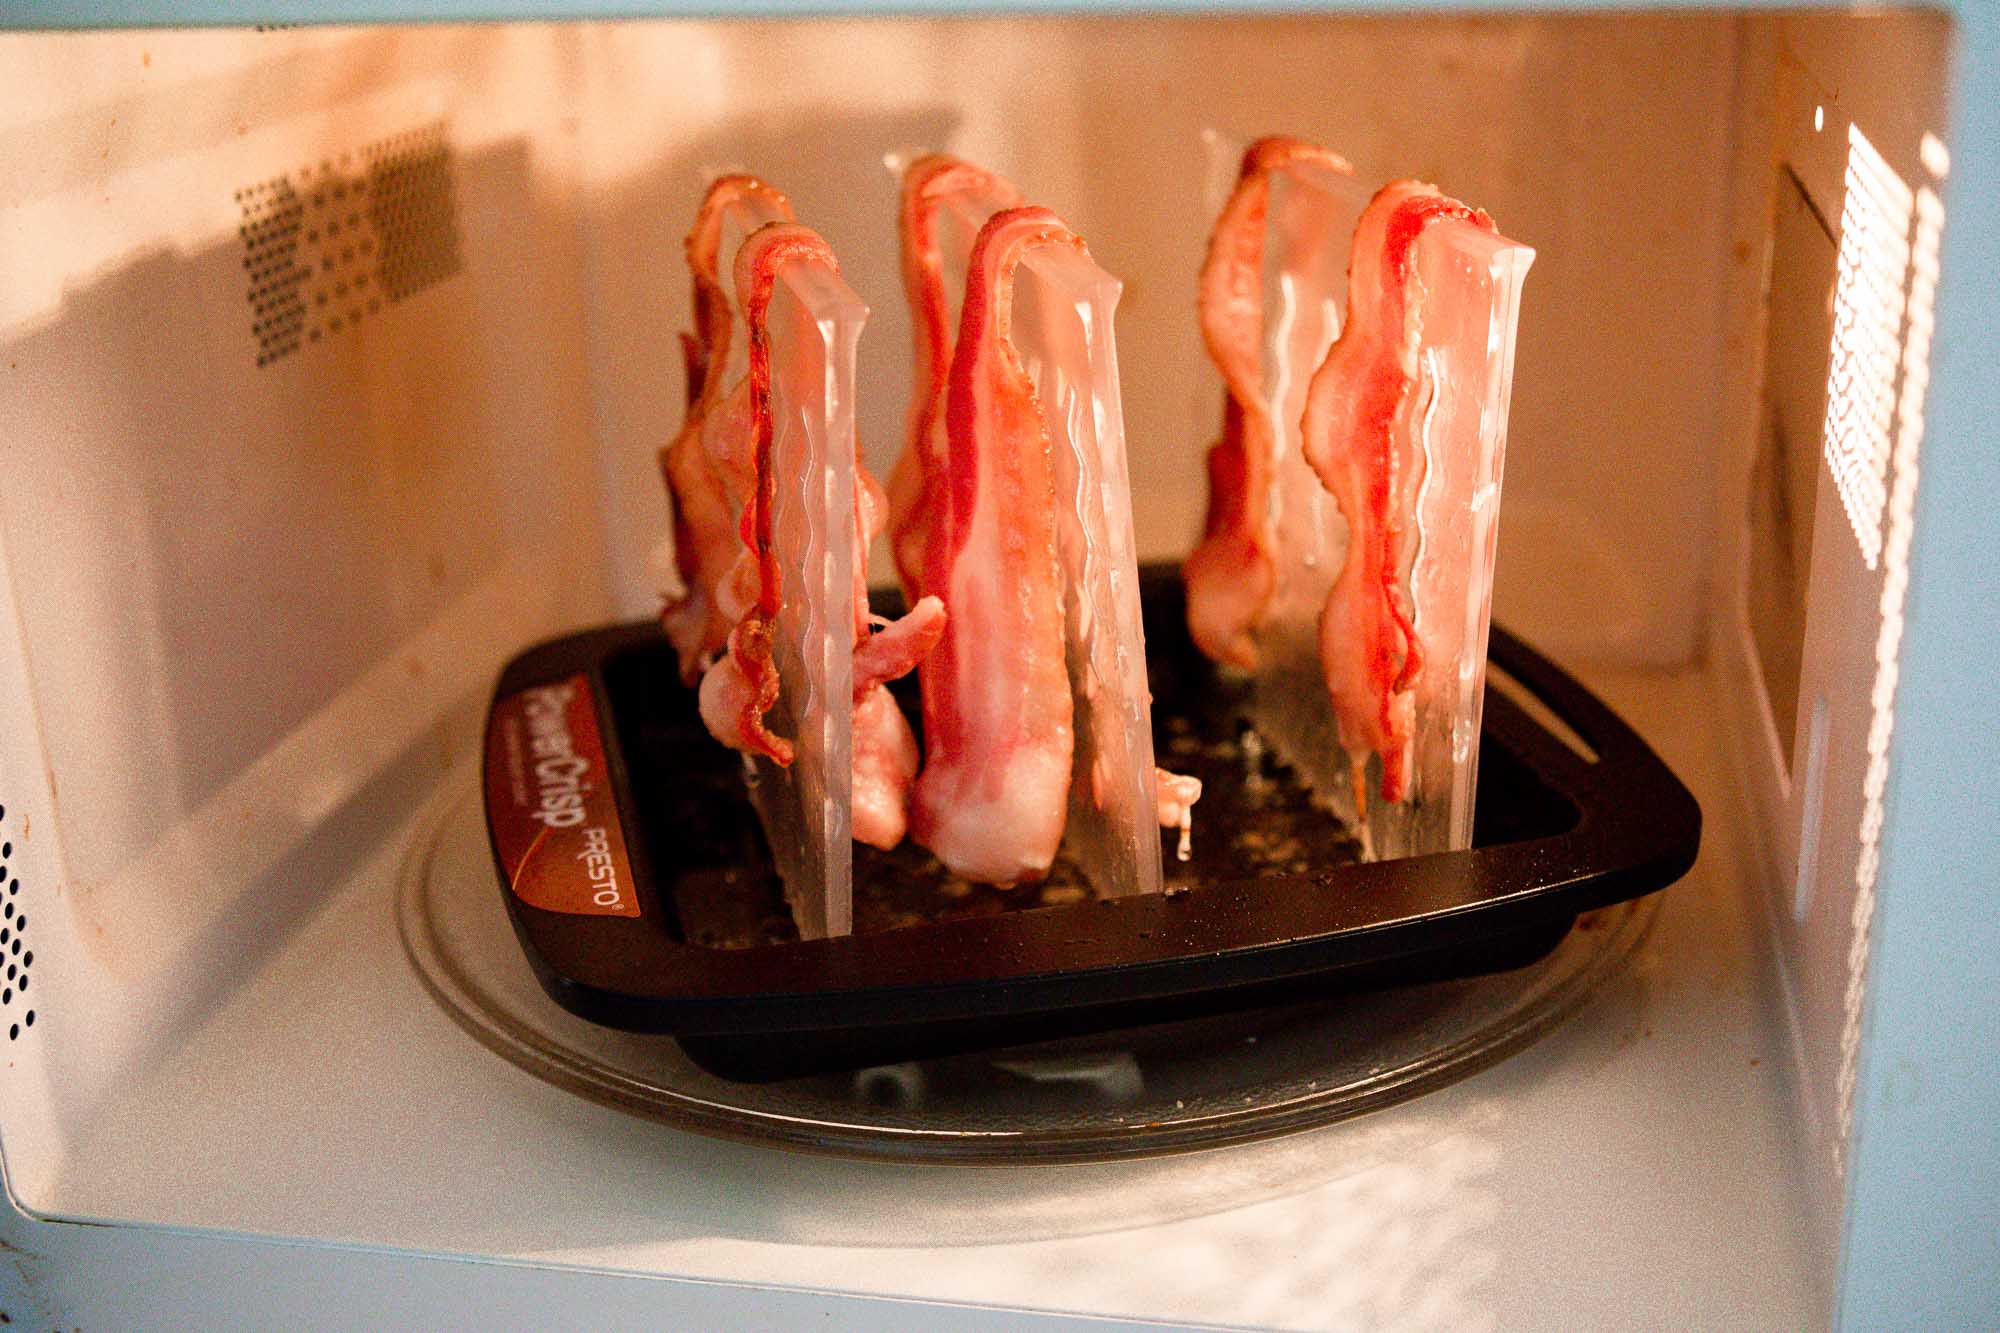 Microwave Bacon Cooker - The Original Bacon Microwave Bacon Tray - Reduces  Fat up to 35% for a Healthy Breakfast 